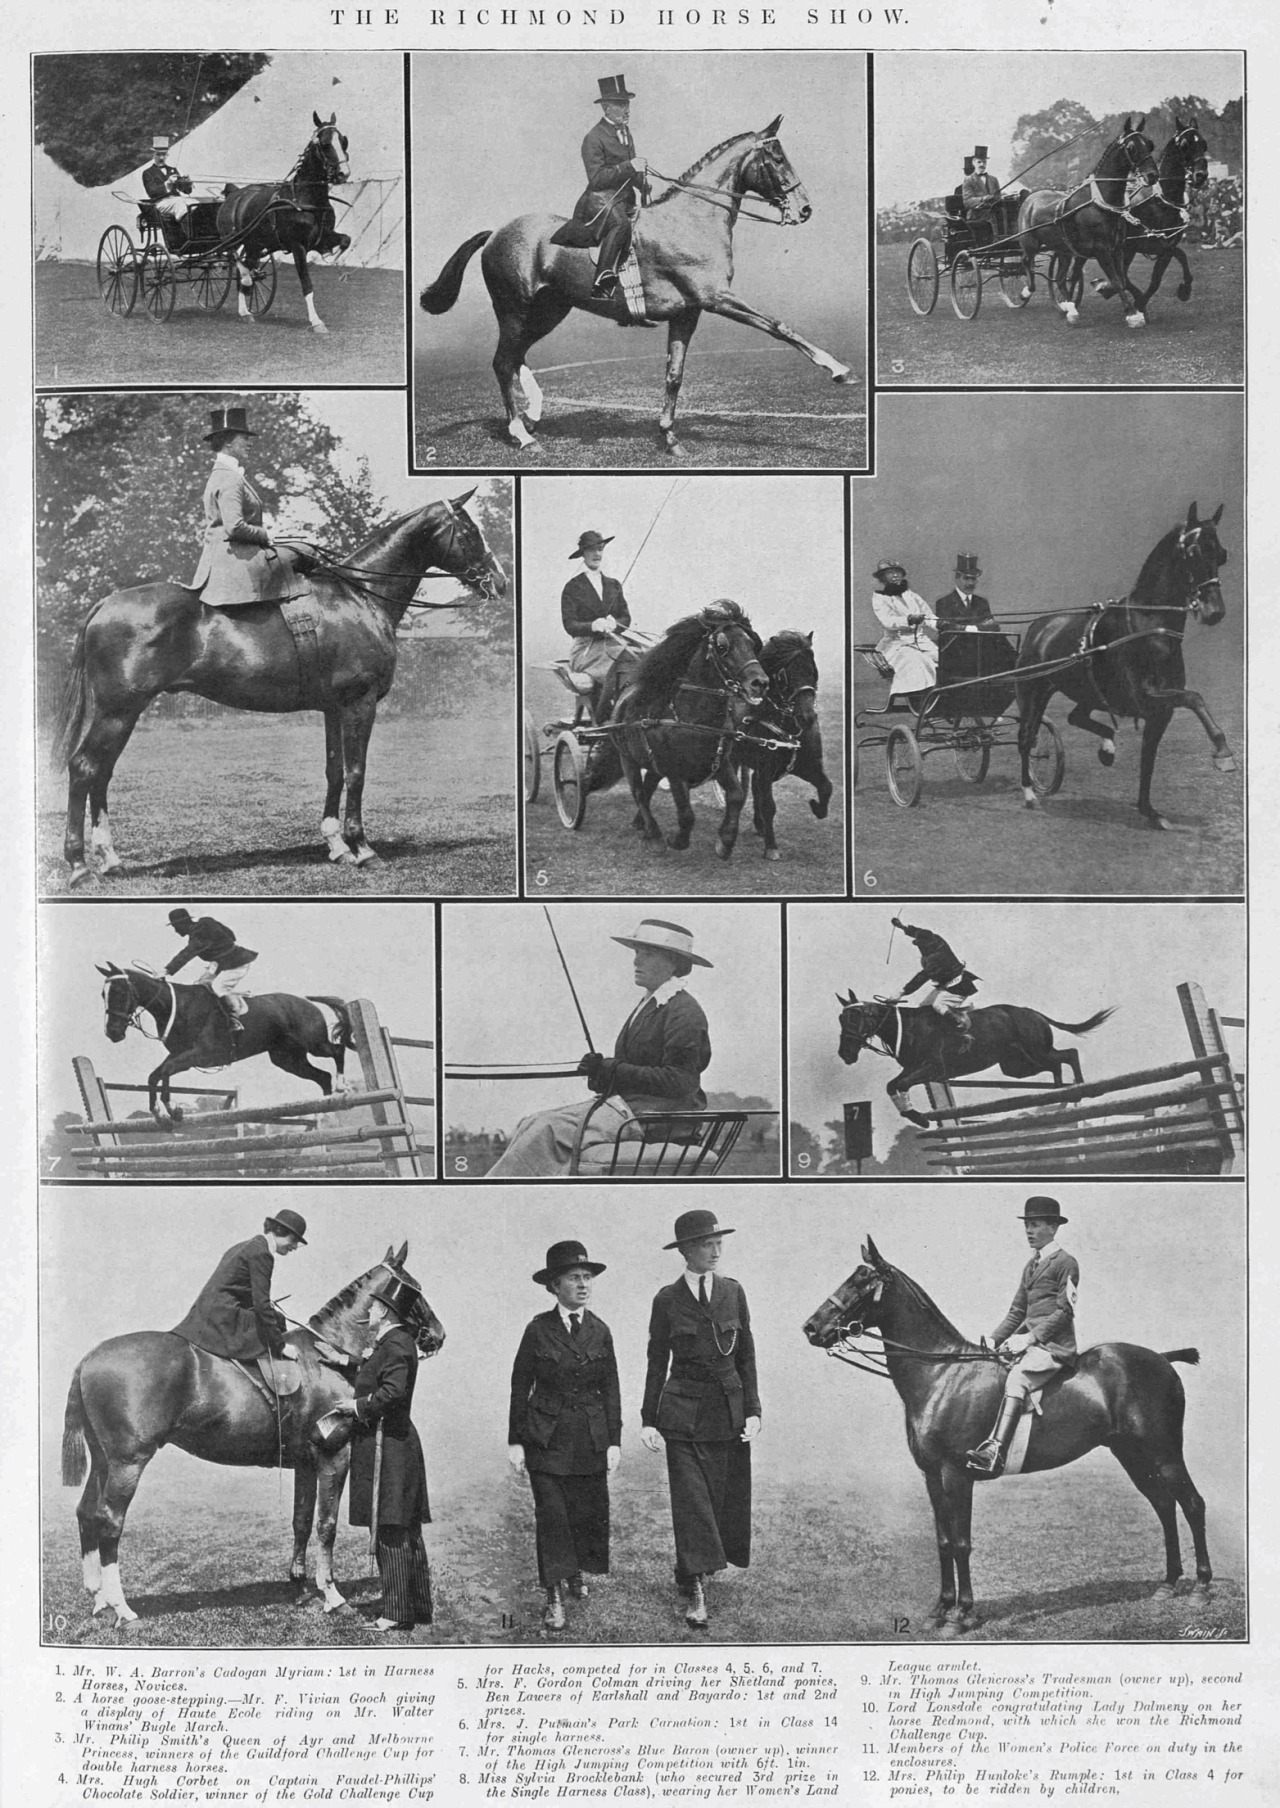 THE RICHMOND HORSE SHOW. Mr. W. A. Barron’s Cadogan Myriam: 1st in Harness Horses, Novices. A horse goose-stepping. - Mr. F. Vivian Gooch giving a display of Haute École riding on Mr. Walter Winans’ Bugle March.Mr. Philip Smith’s Queen of Ayr and Melbourne Princess, winners of the Guildford Challenge Cup for double harness horses. Mrs. Hugh Corbet on Captain Faudel-Phillips’ Chocolate Soldier, winner of the Gold Challenge Cup for Hacks, competed for in Classes 4, 5, 6, and 7. Mrs. F. Gordon Colman driving her Shetland ponies, Ben Lawers of Earlshall and Bayardo: 1st and 2nd prizes. Mrs. J. Putman’s Park Connection, 1st in Class 14 for single harness. Mr. Thomas Glencross’s Blue Baron (owner up), winner of the High Jumping Competition with 6ft 1in. Miss Sylvia Brocklebank (who secured 3rd prize in the Single Harness Class), wearing her Women’s Land League armband. Mr. Thomas Glencross’s Tradesman (owner up), second in High Jumping Competition. Lord Lonsdale congratulating Lady Dalmeny on her horse Redmond, with which she won the Richmond Challenge Cup. Members of the Women’s Police Force on duty in the enclosures. Mrs. Philip Hunlocke’s Rumple: 1st in Class 4 for ponies, to be ridden by children. The Illustrated Sporting and Dramatic News, 24 June 1916 #Richmond Horse Show #Cadogan Myriam#harness horse#Bugle March#dressage#haute école #F. Vivian Gooch  #Queen of Ayr #Melbourne Princess#Chocolate Soldier #Mrs. Hugh Corbet  #Ben Lawers of Earlshall #Bayardo#Shetland pony #Mrs. F. Gordon Colman #Park Connection#Blue Baron#Tradesman#jumping#high jump#Thomas Glencross#Sylvia Brocklebank#Lord Lonsdale#Lady Dalmeny#Redmond#Rumple #Illustrated Sporting & Dramatic News #1916